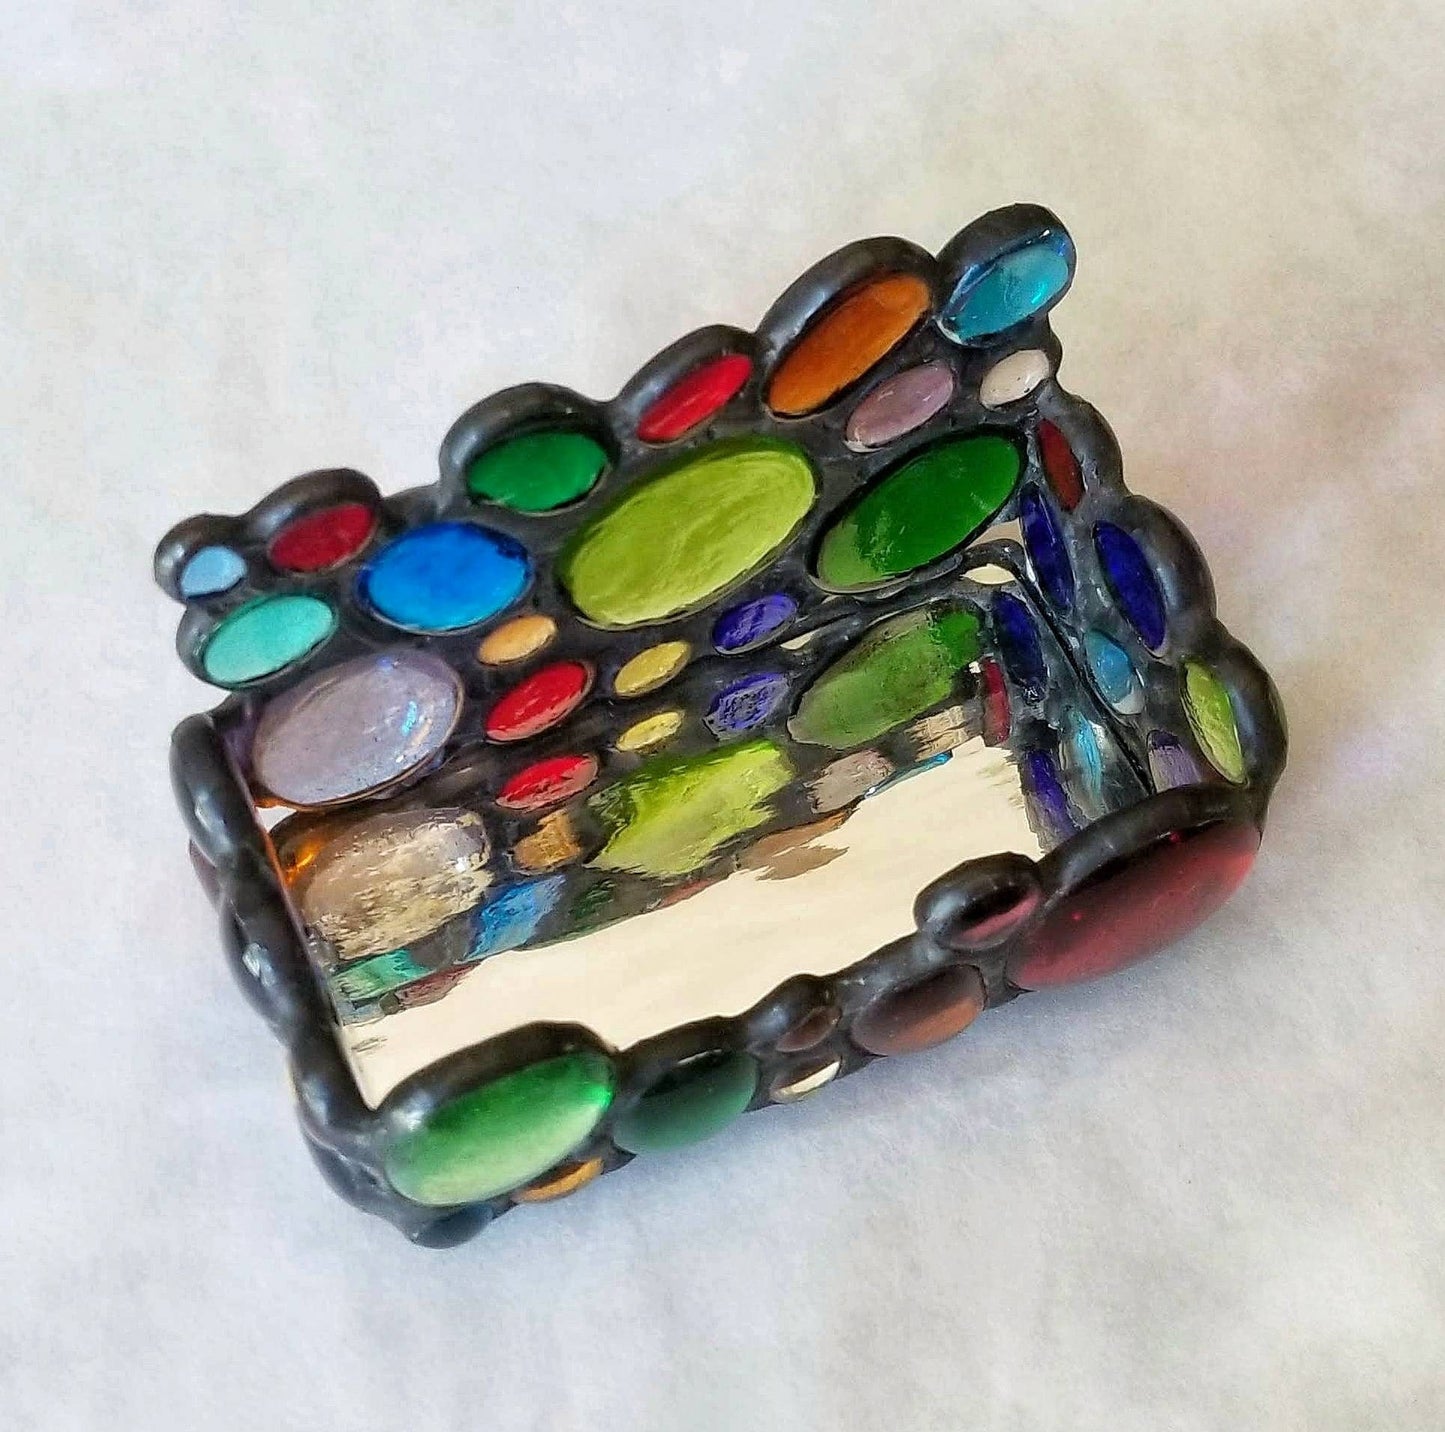 Business Card Holder for Desk. Stained Glass Gems sparkle on mirrored base. Secretary gift, home office decor. Stow notes & pens on counter.